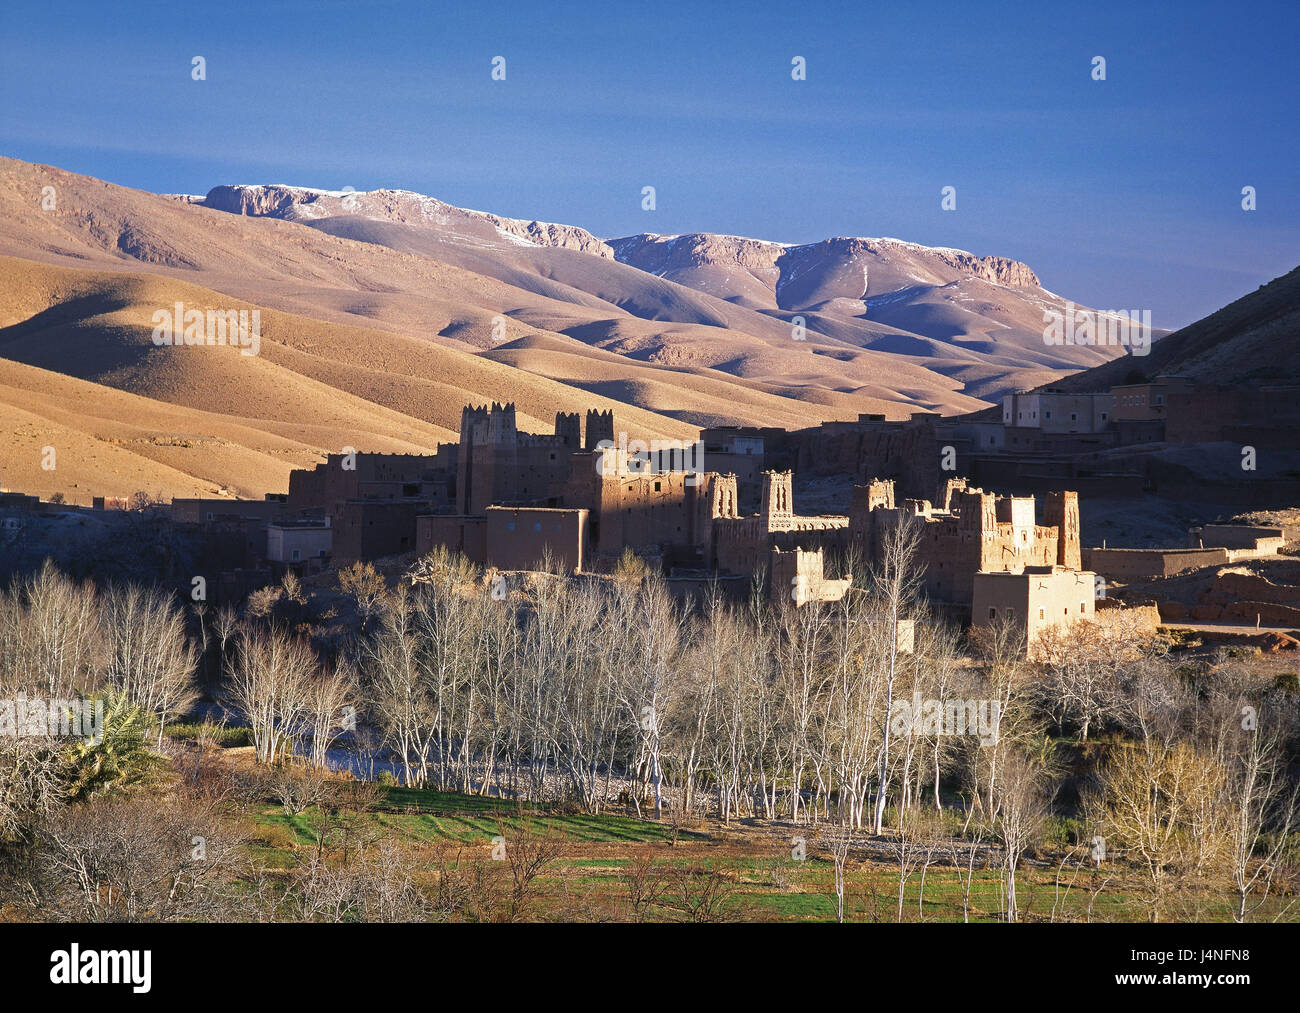 Morocco, Dades valley, kasbah, the Atlas Mountains, Africa, North Africa, Dadestal, scenery, mountains, structure, fortress, castle grounds, fortress attachment, Stock Photo